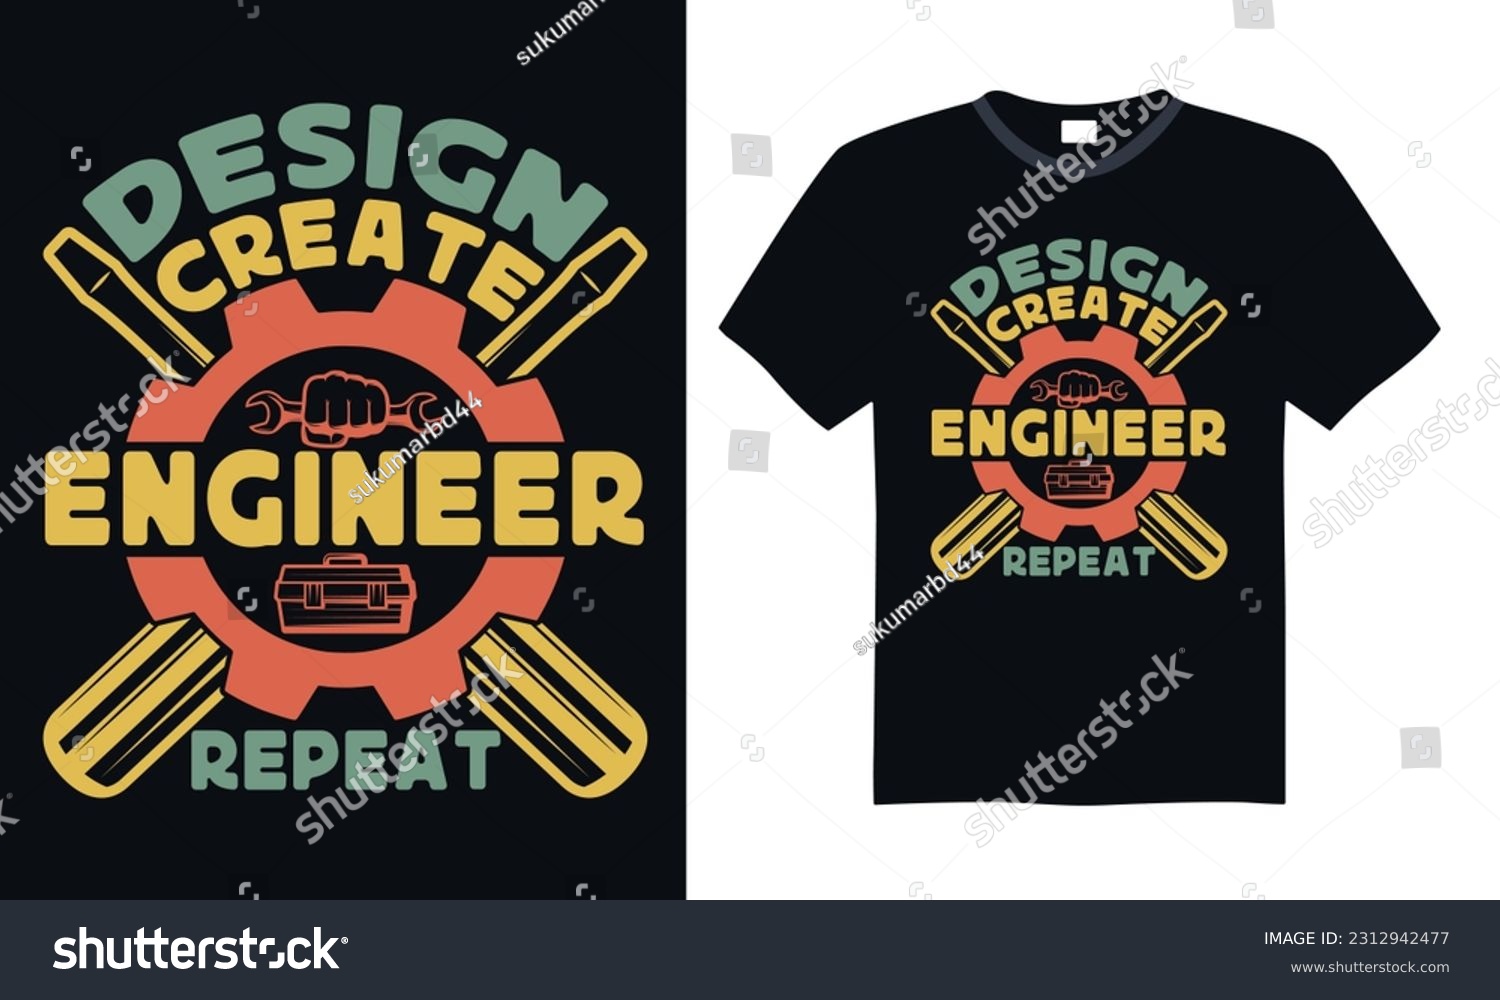 SVG of Design Create Engineer Repeat - Engineering T-shirt Design, SVG Files for Cutting, Handmade calligraphy vector illustration, Hand written vector sign svg